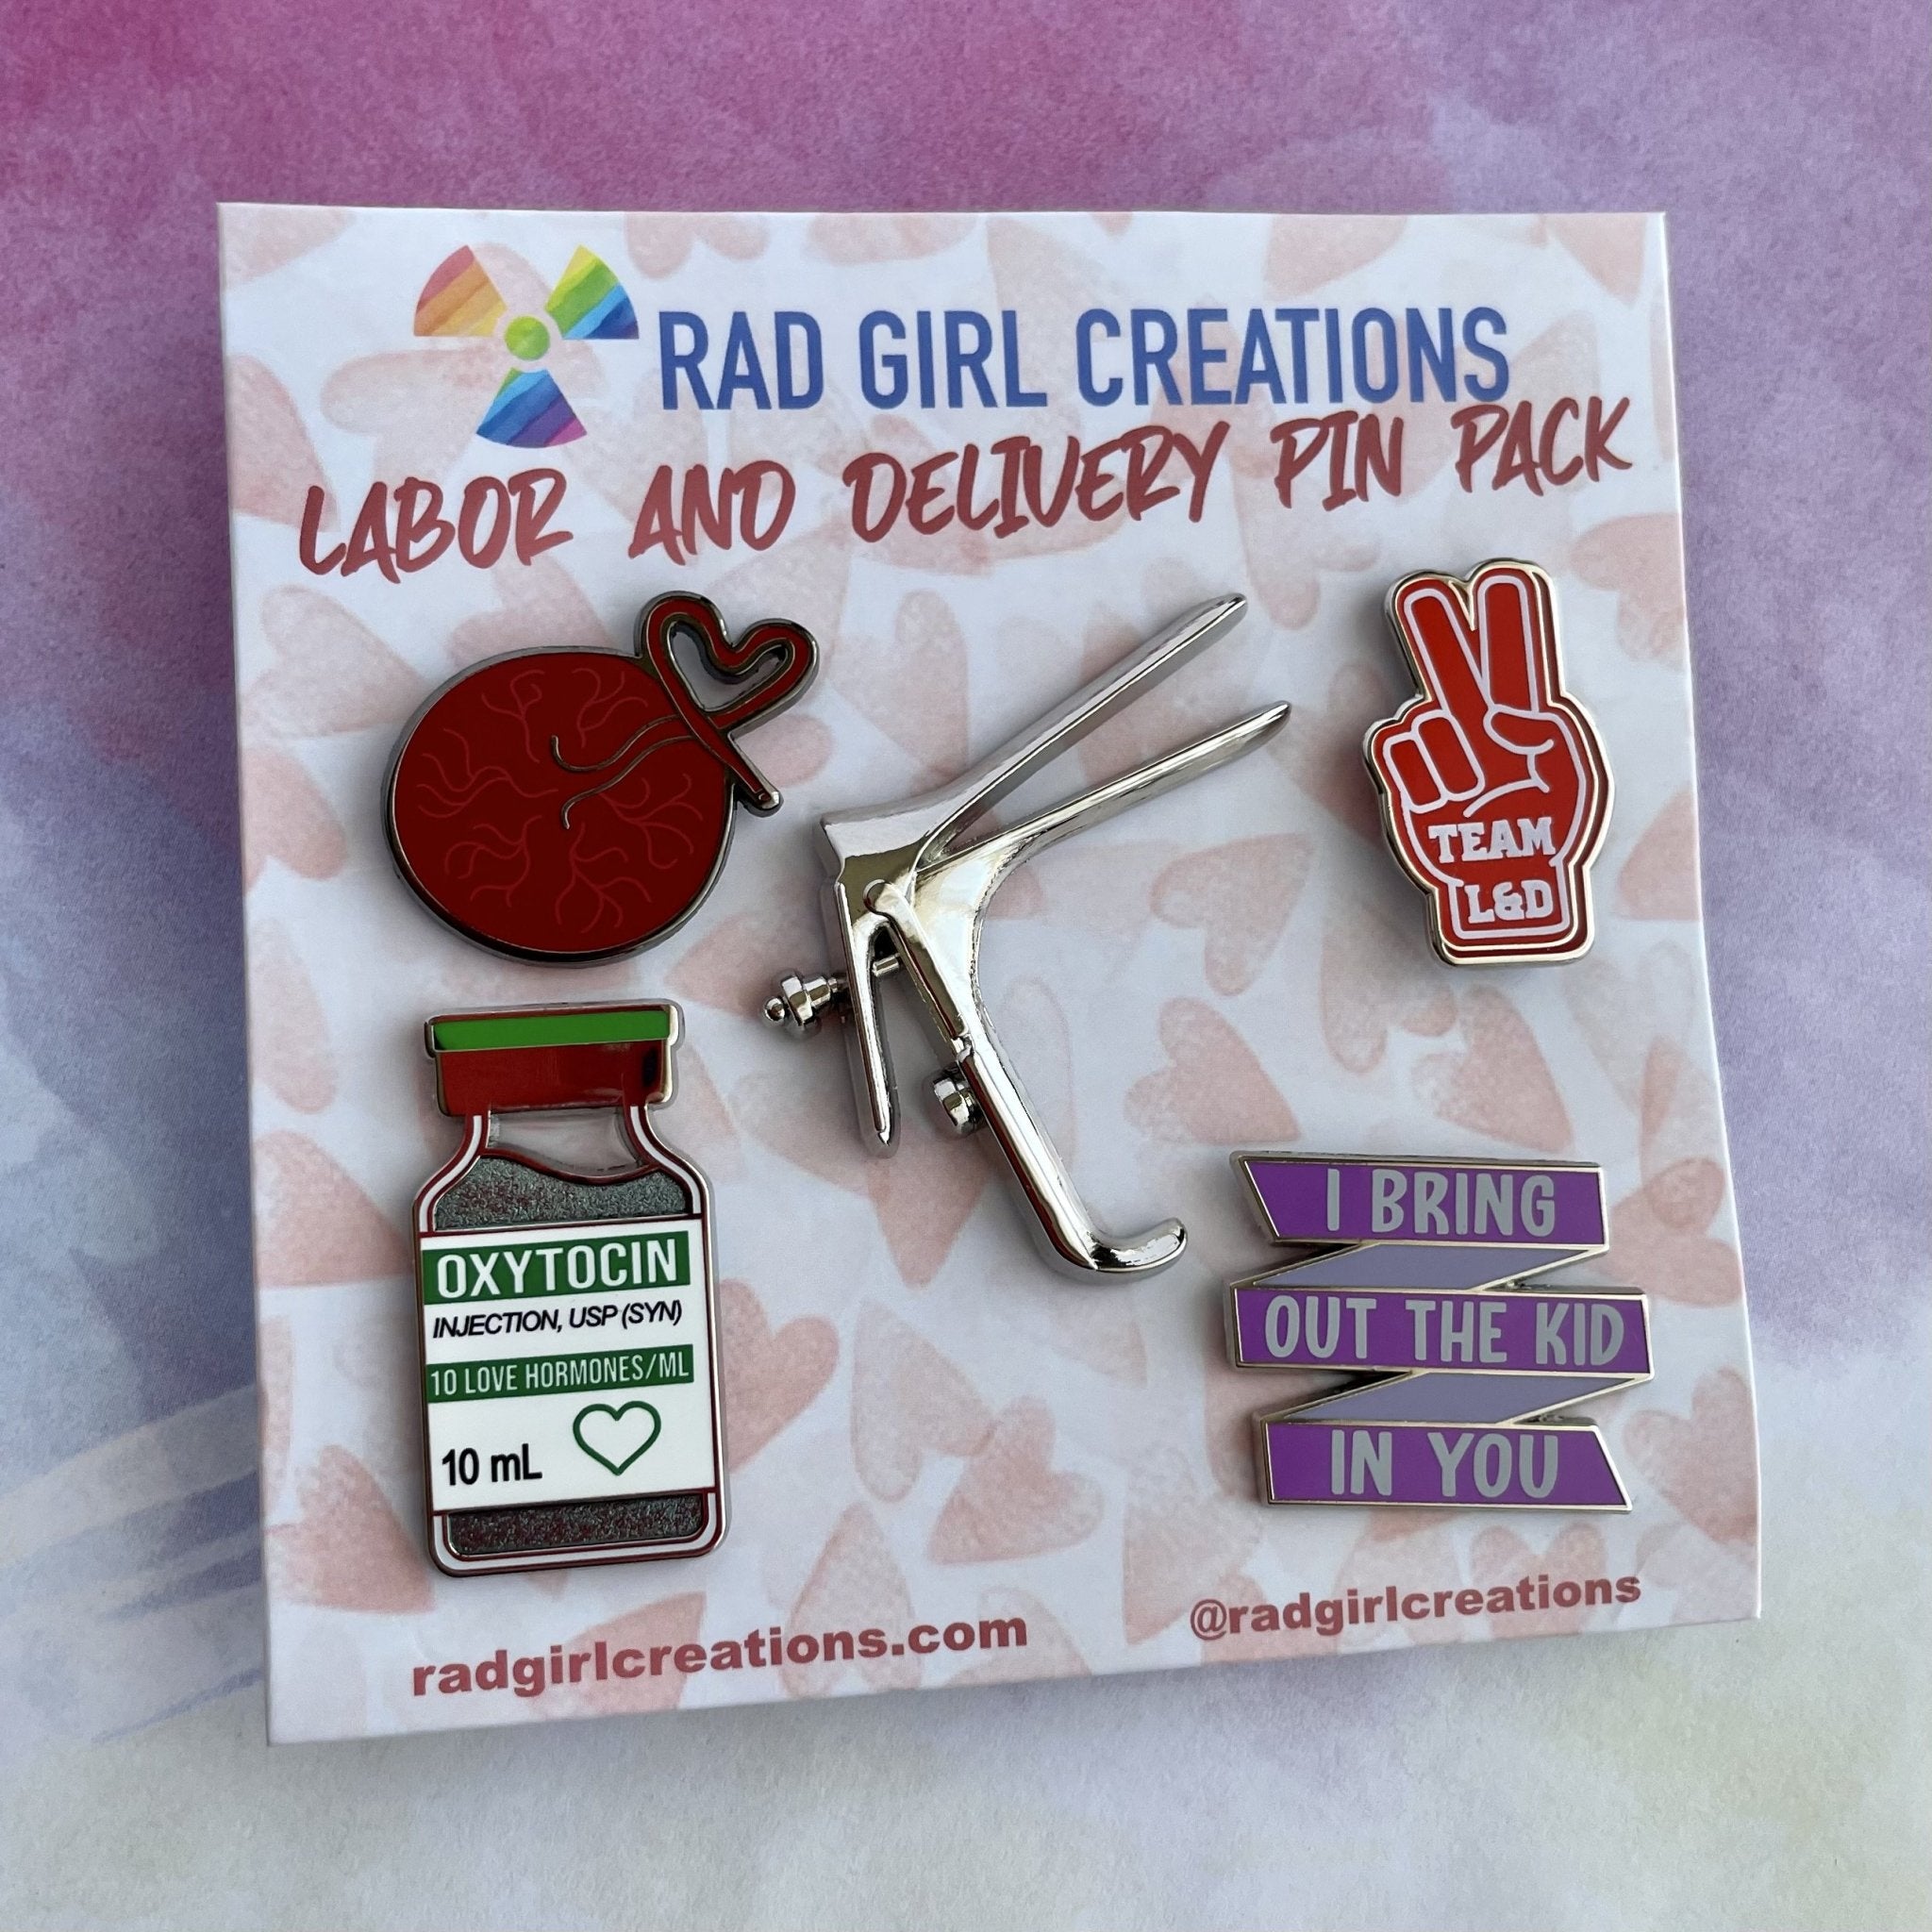 Labor and Delivery Pin Pack - Rad Girl Creations - Medical Enamel Pin